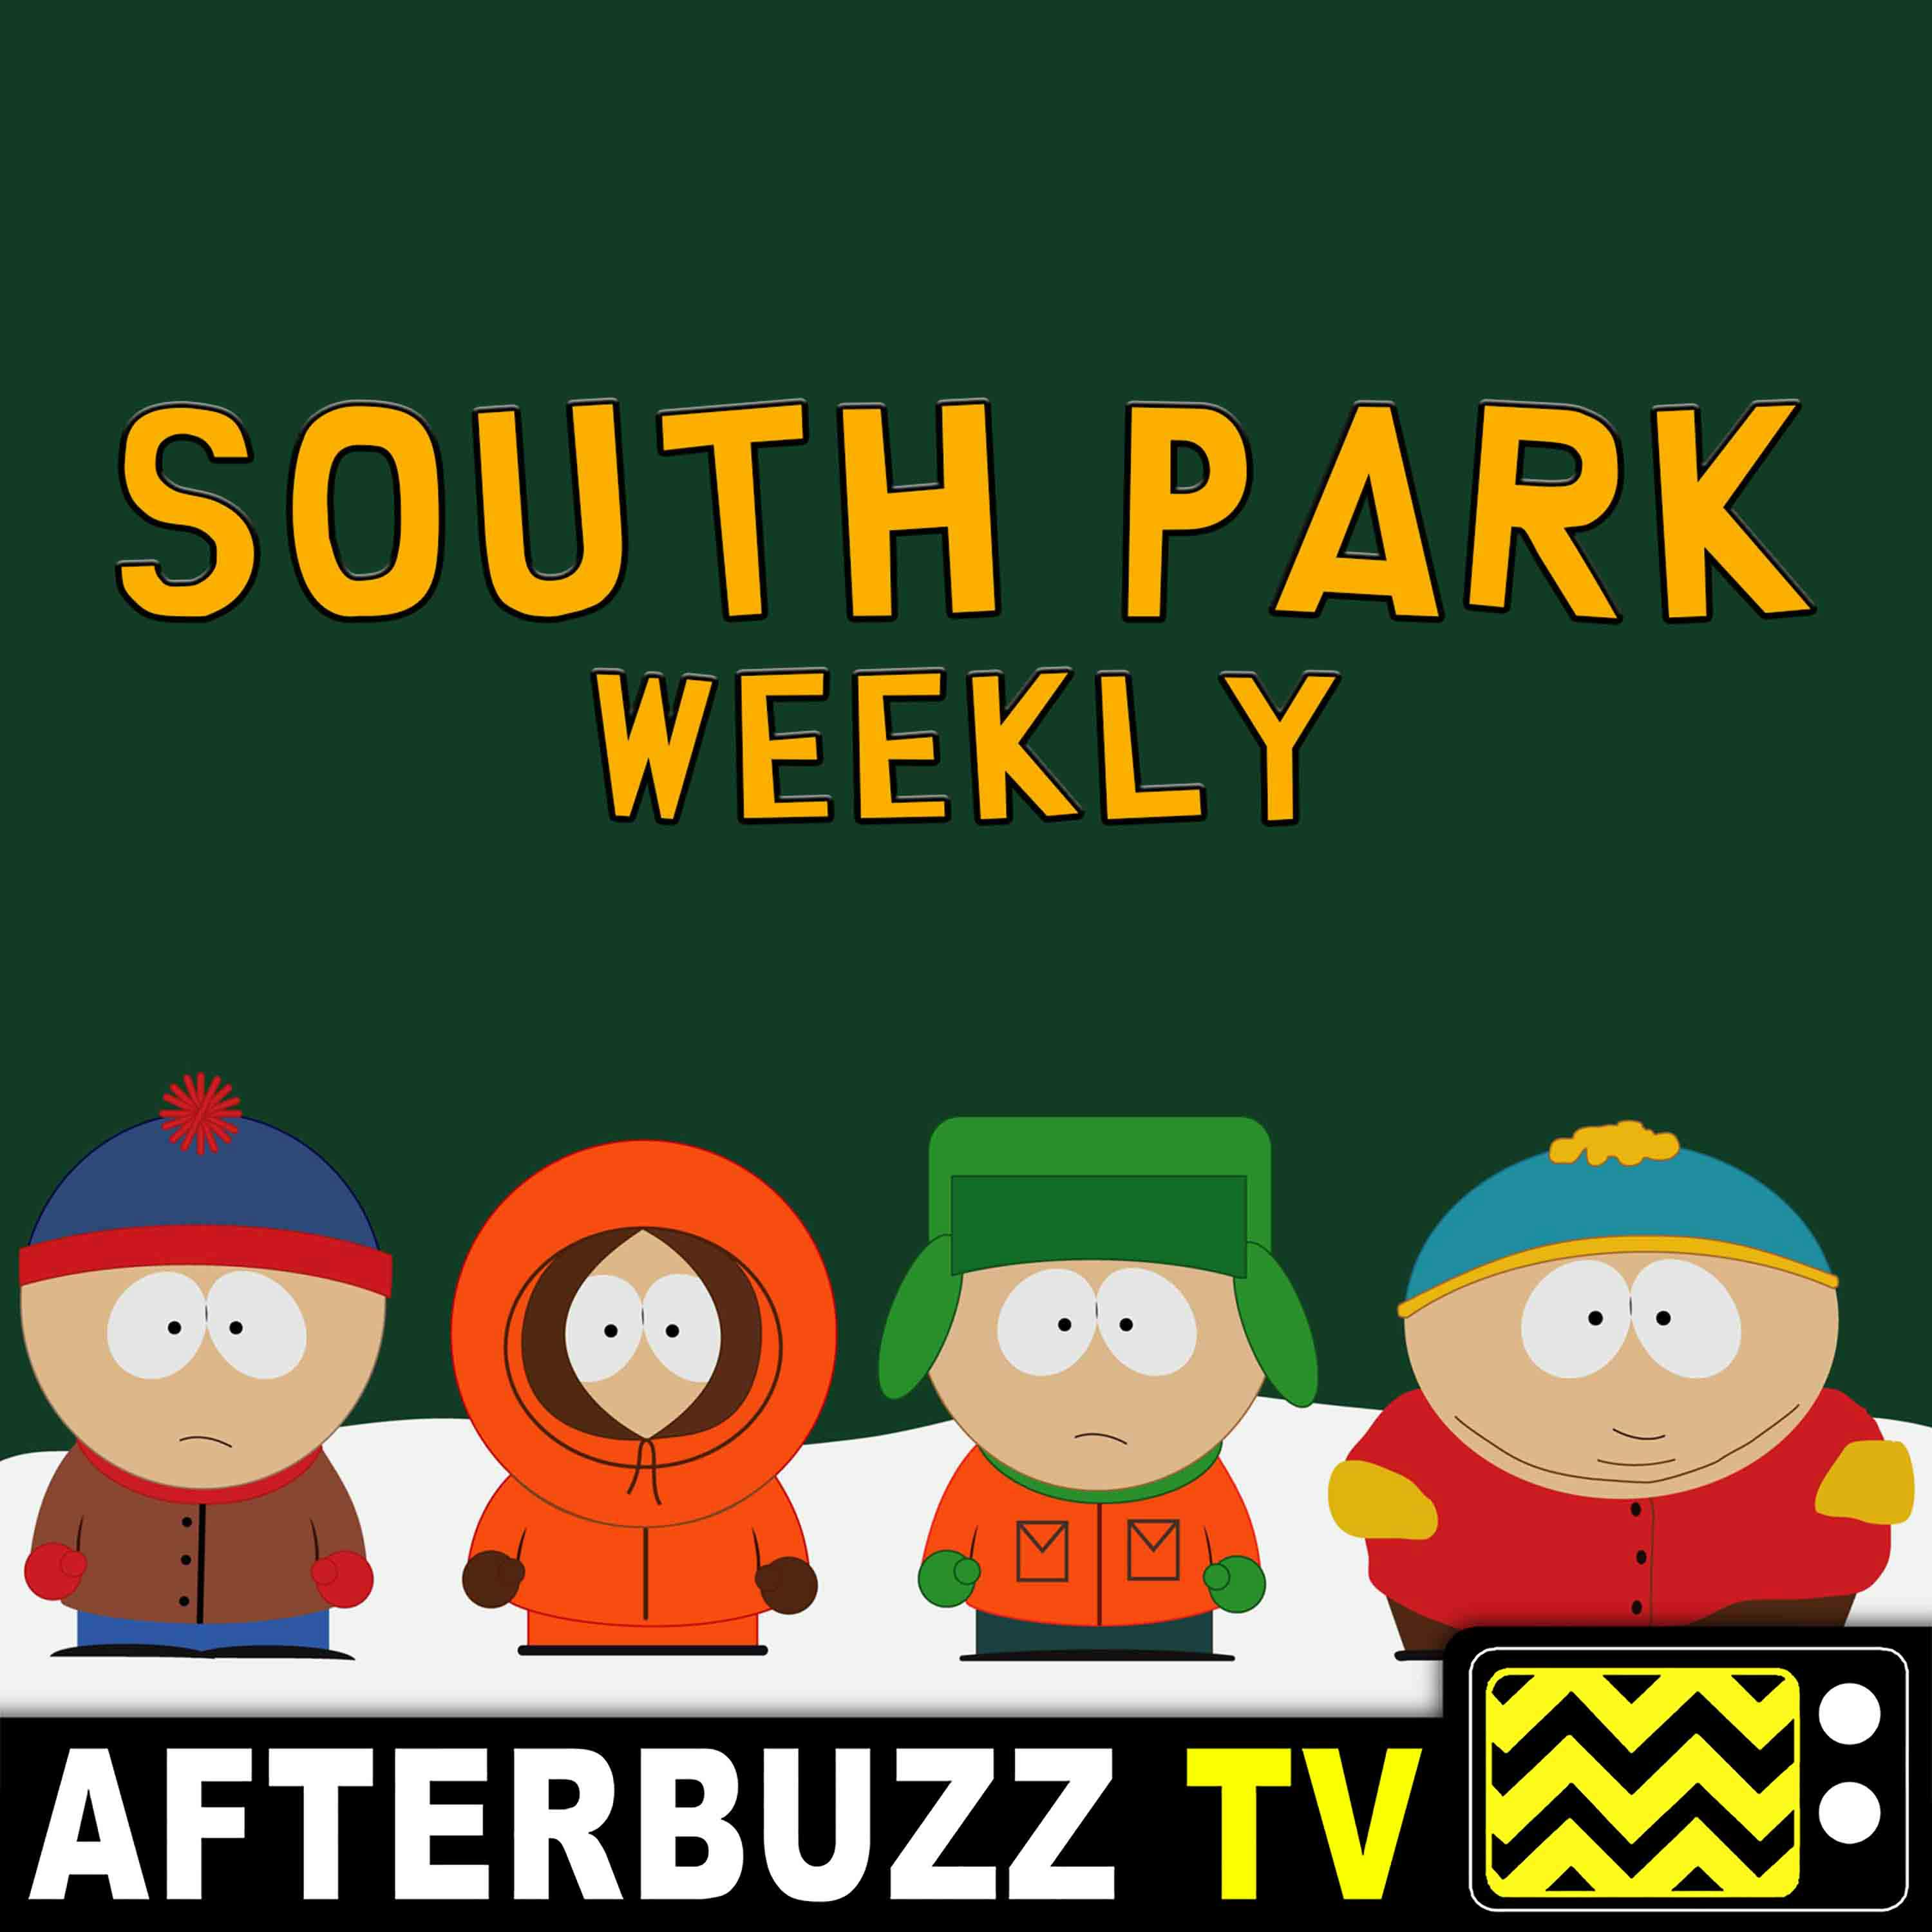 South Park Weekly - AfterBuzz TV